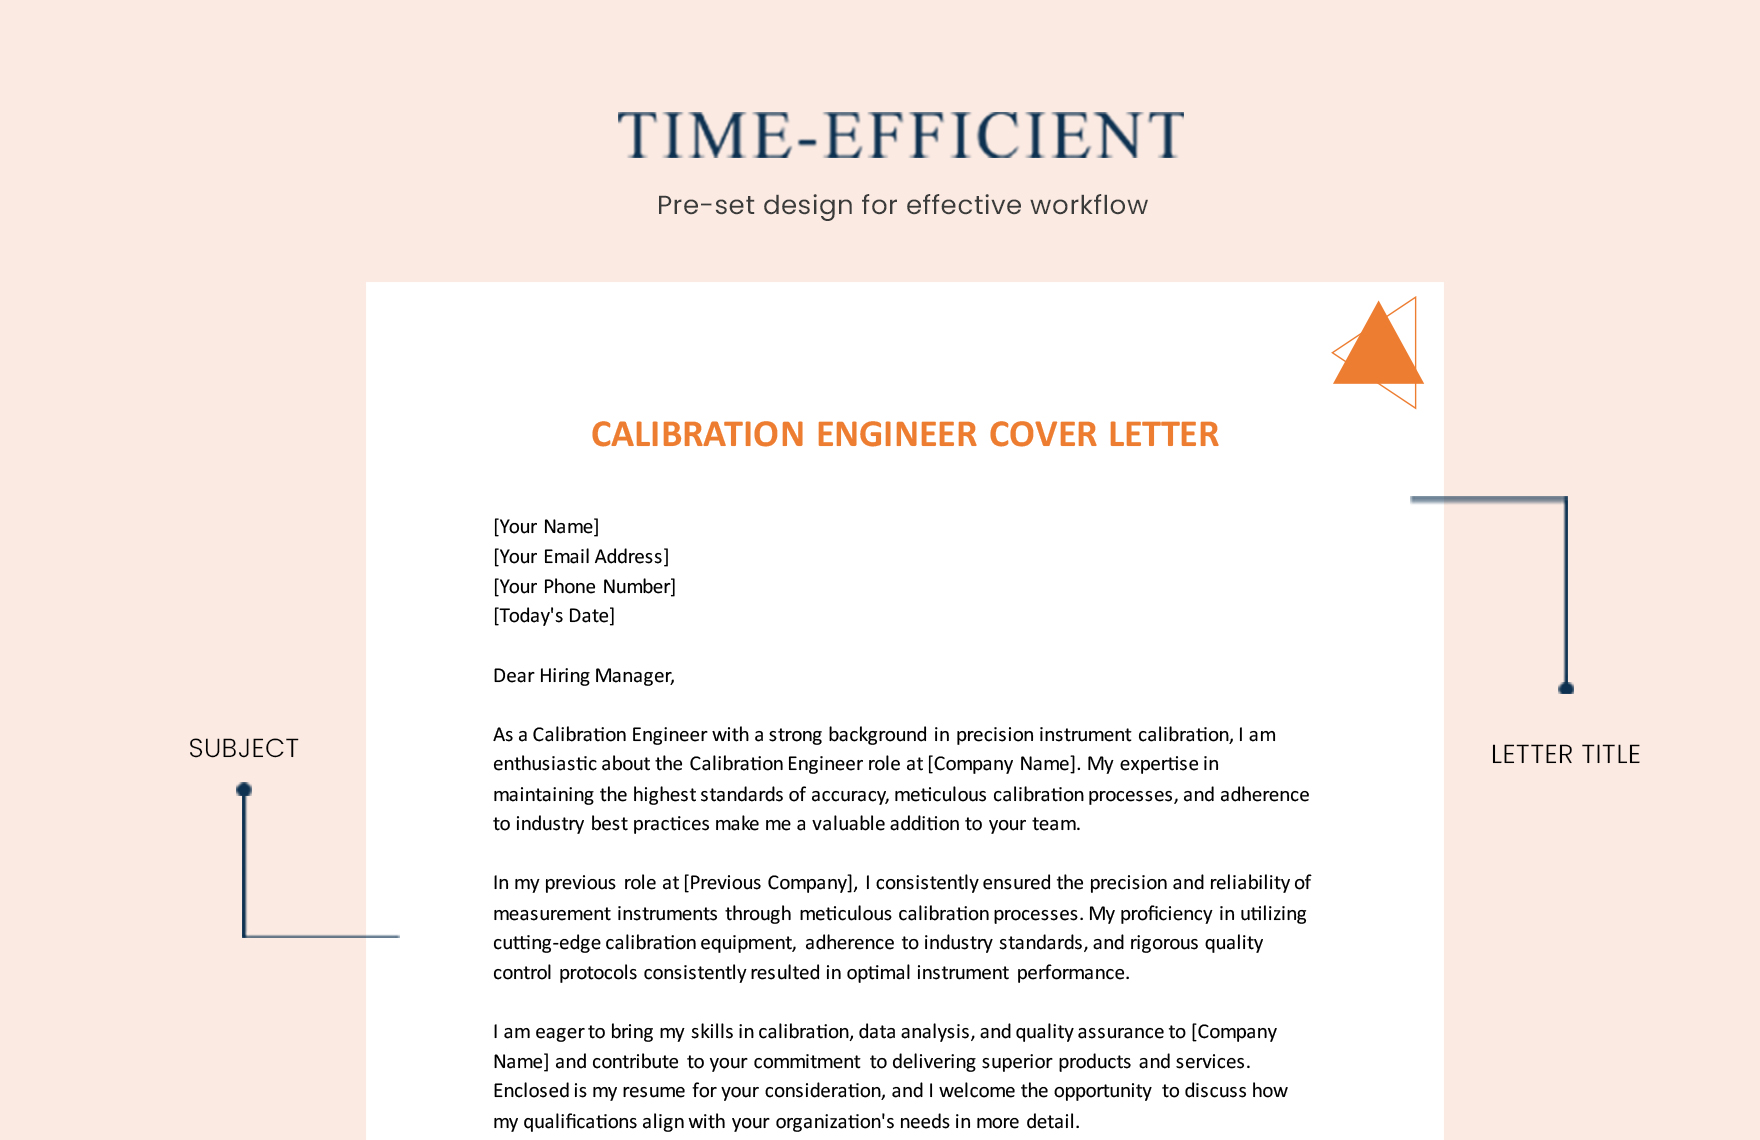 Calibration Engineer Cover Letter